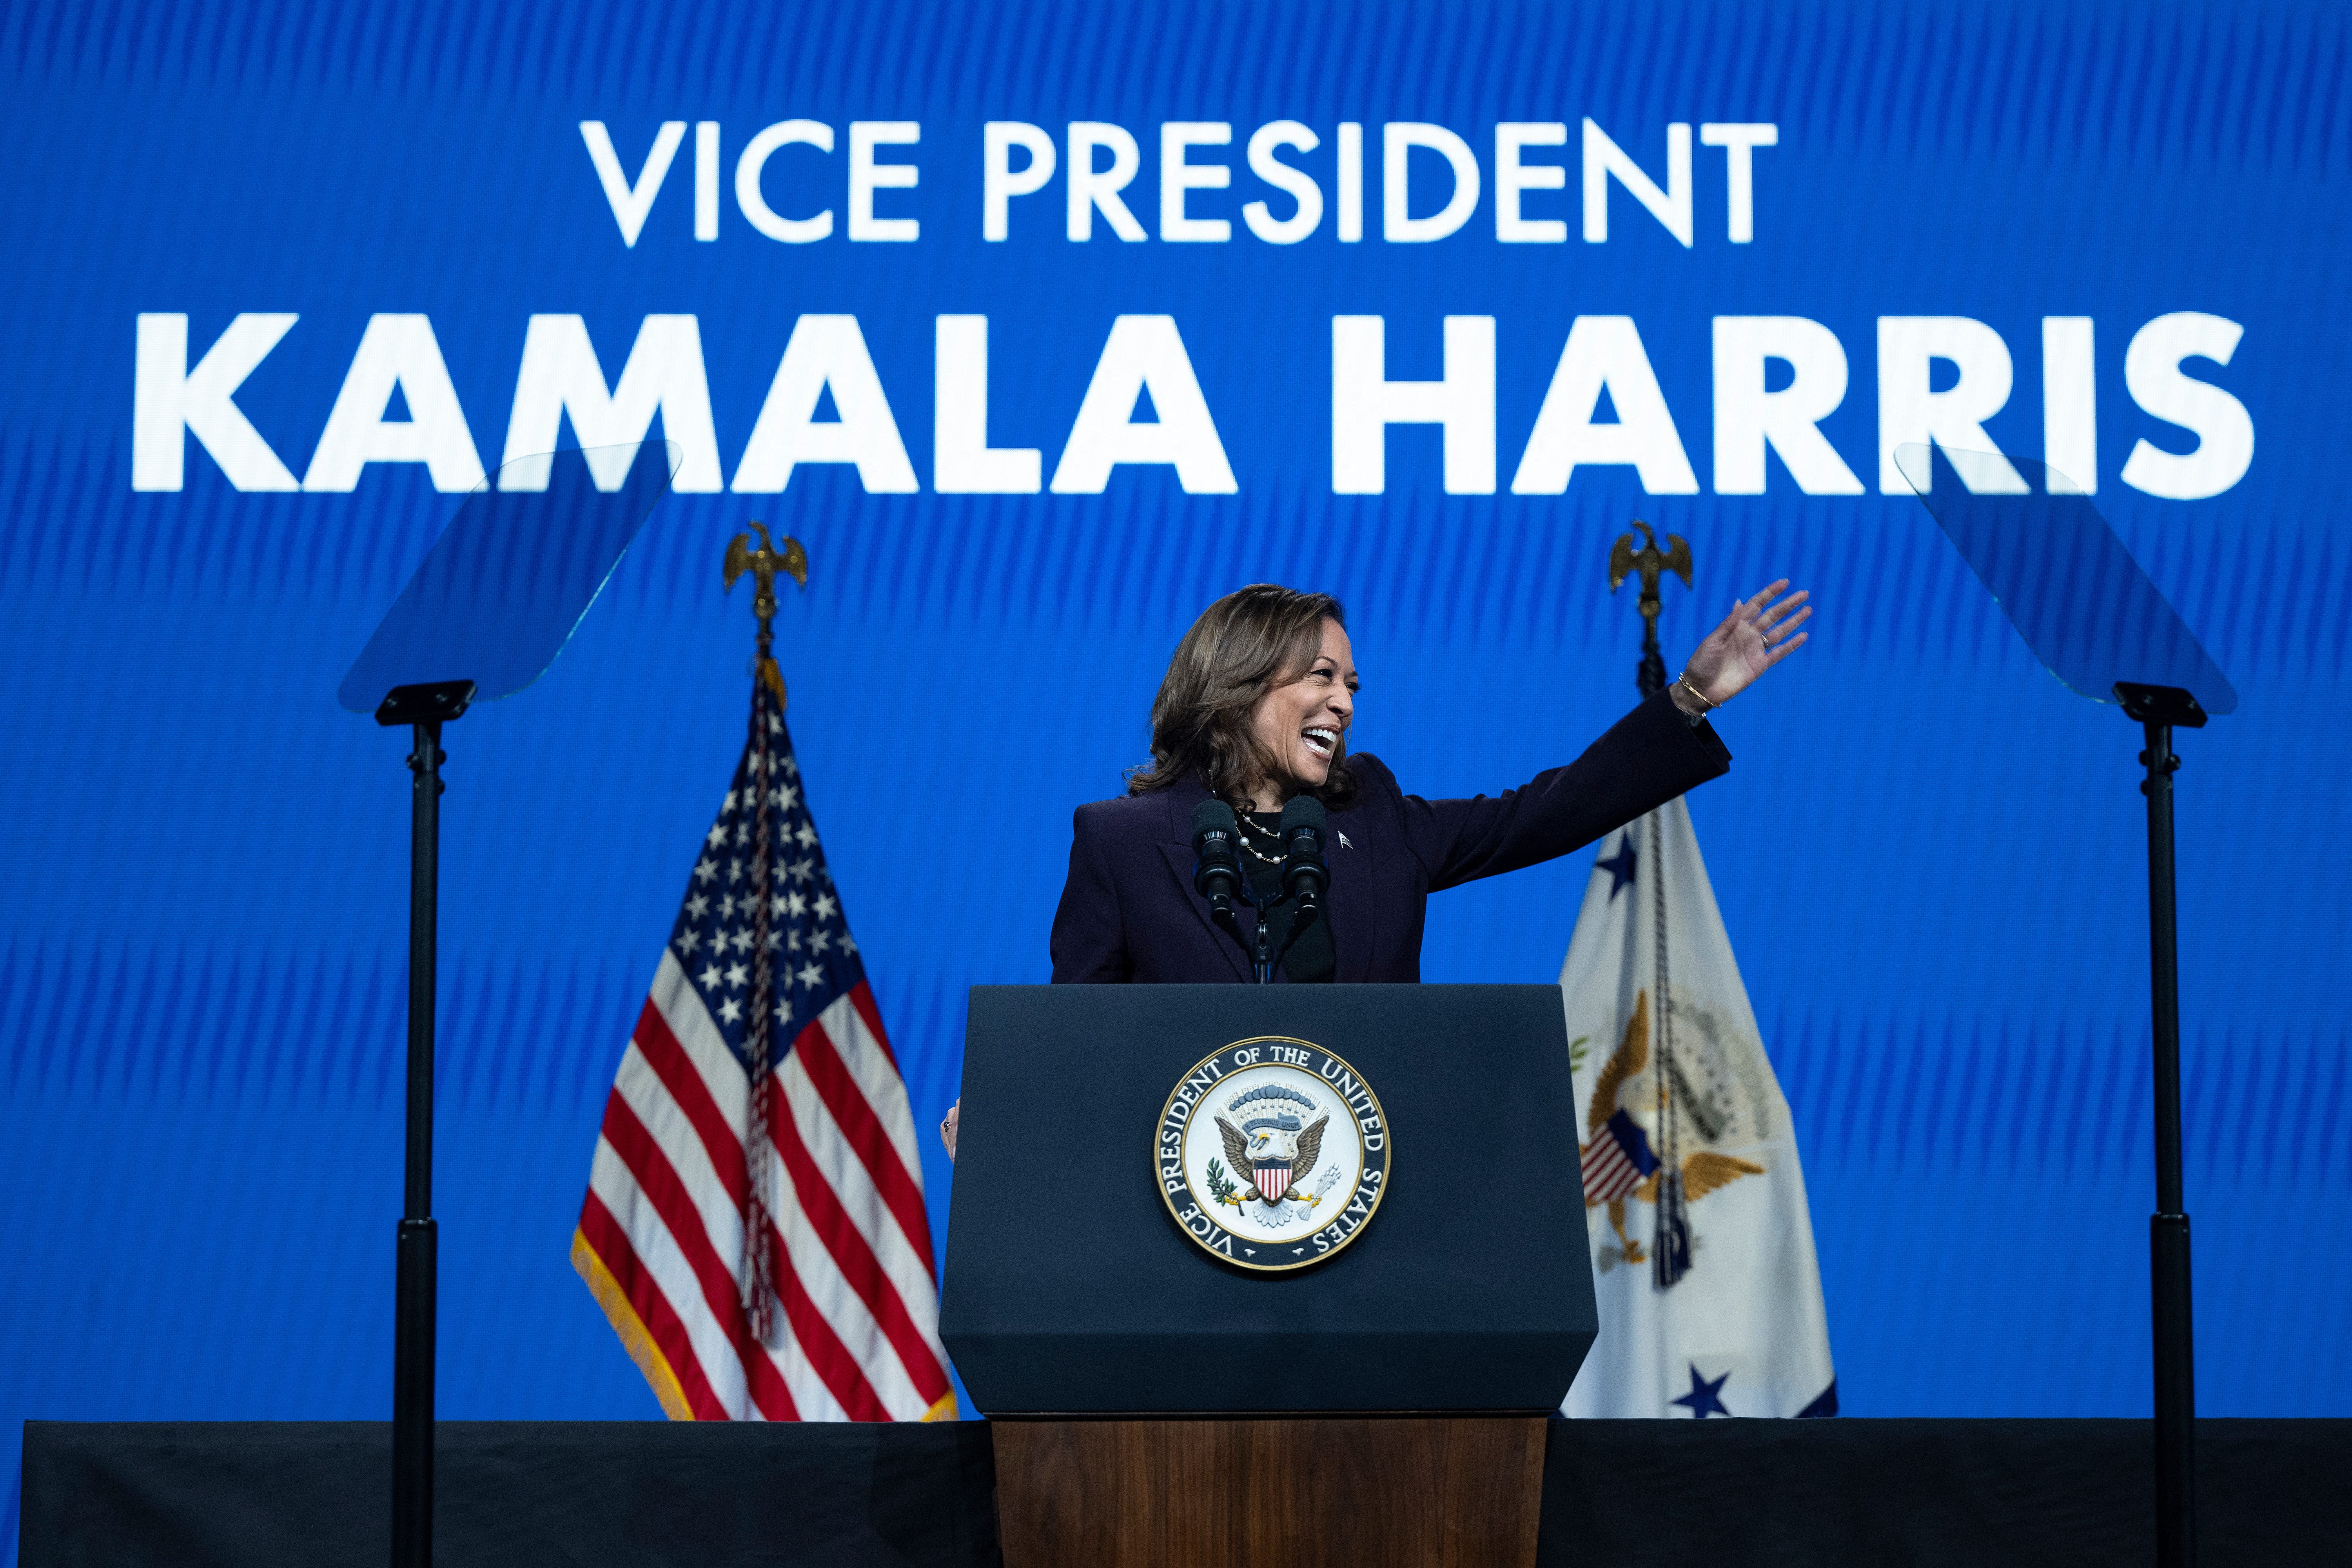 Republicans, pay attention to who Harris picks for VP. One of them should scare us.